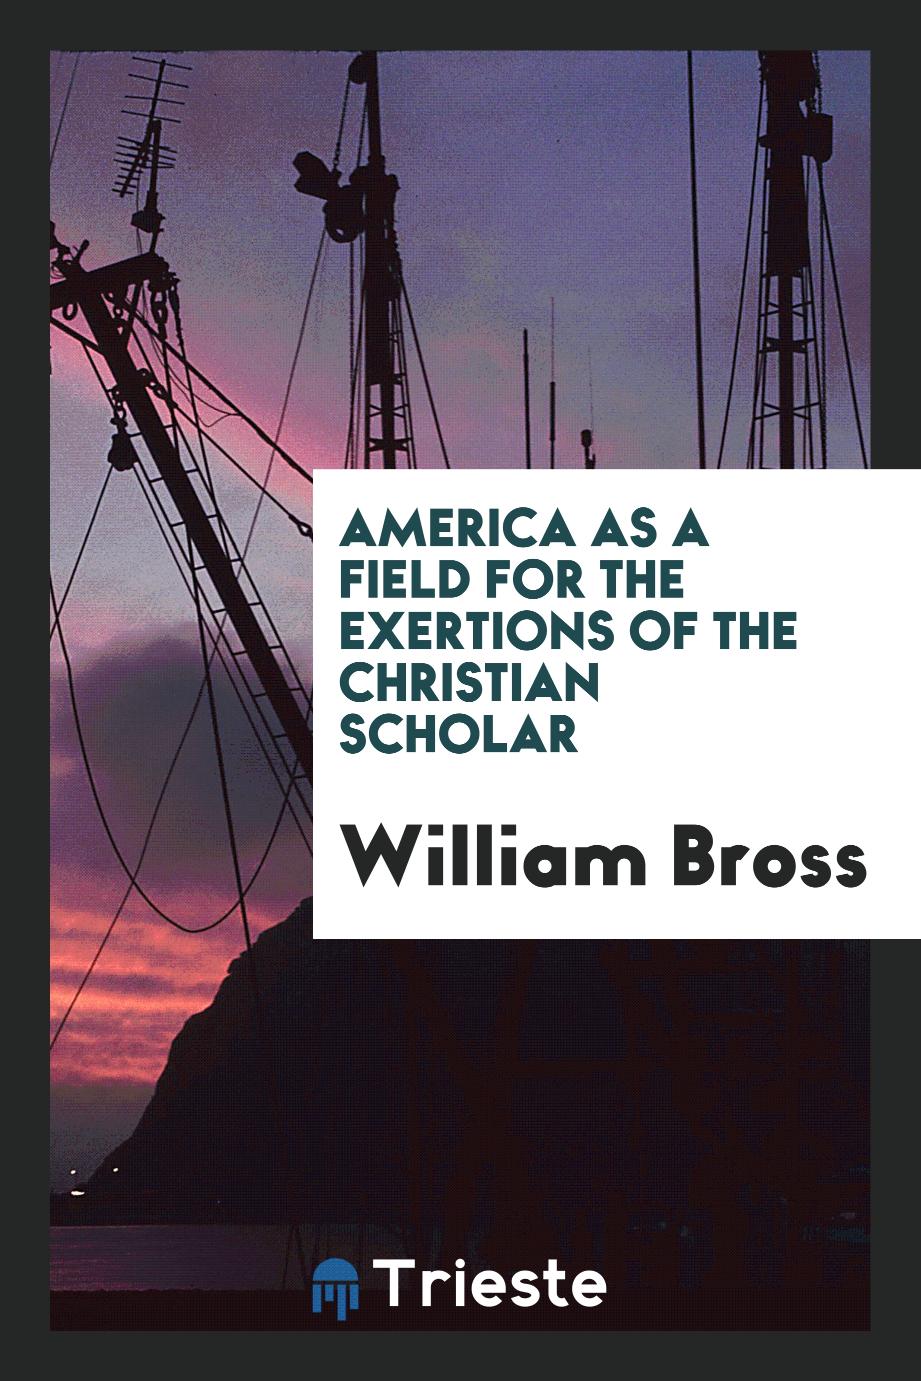 America as a field for the exertions of the Christian scholar